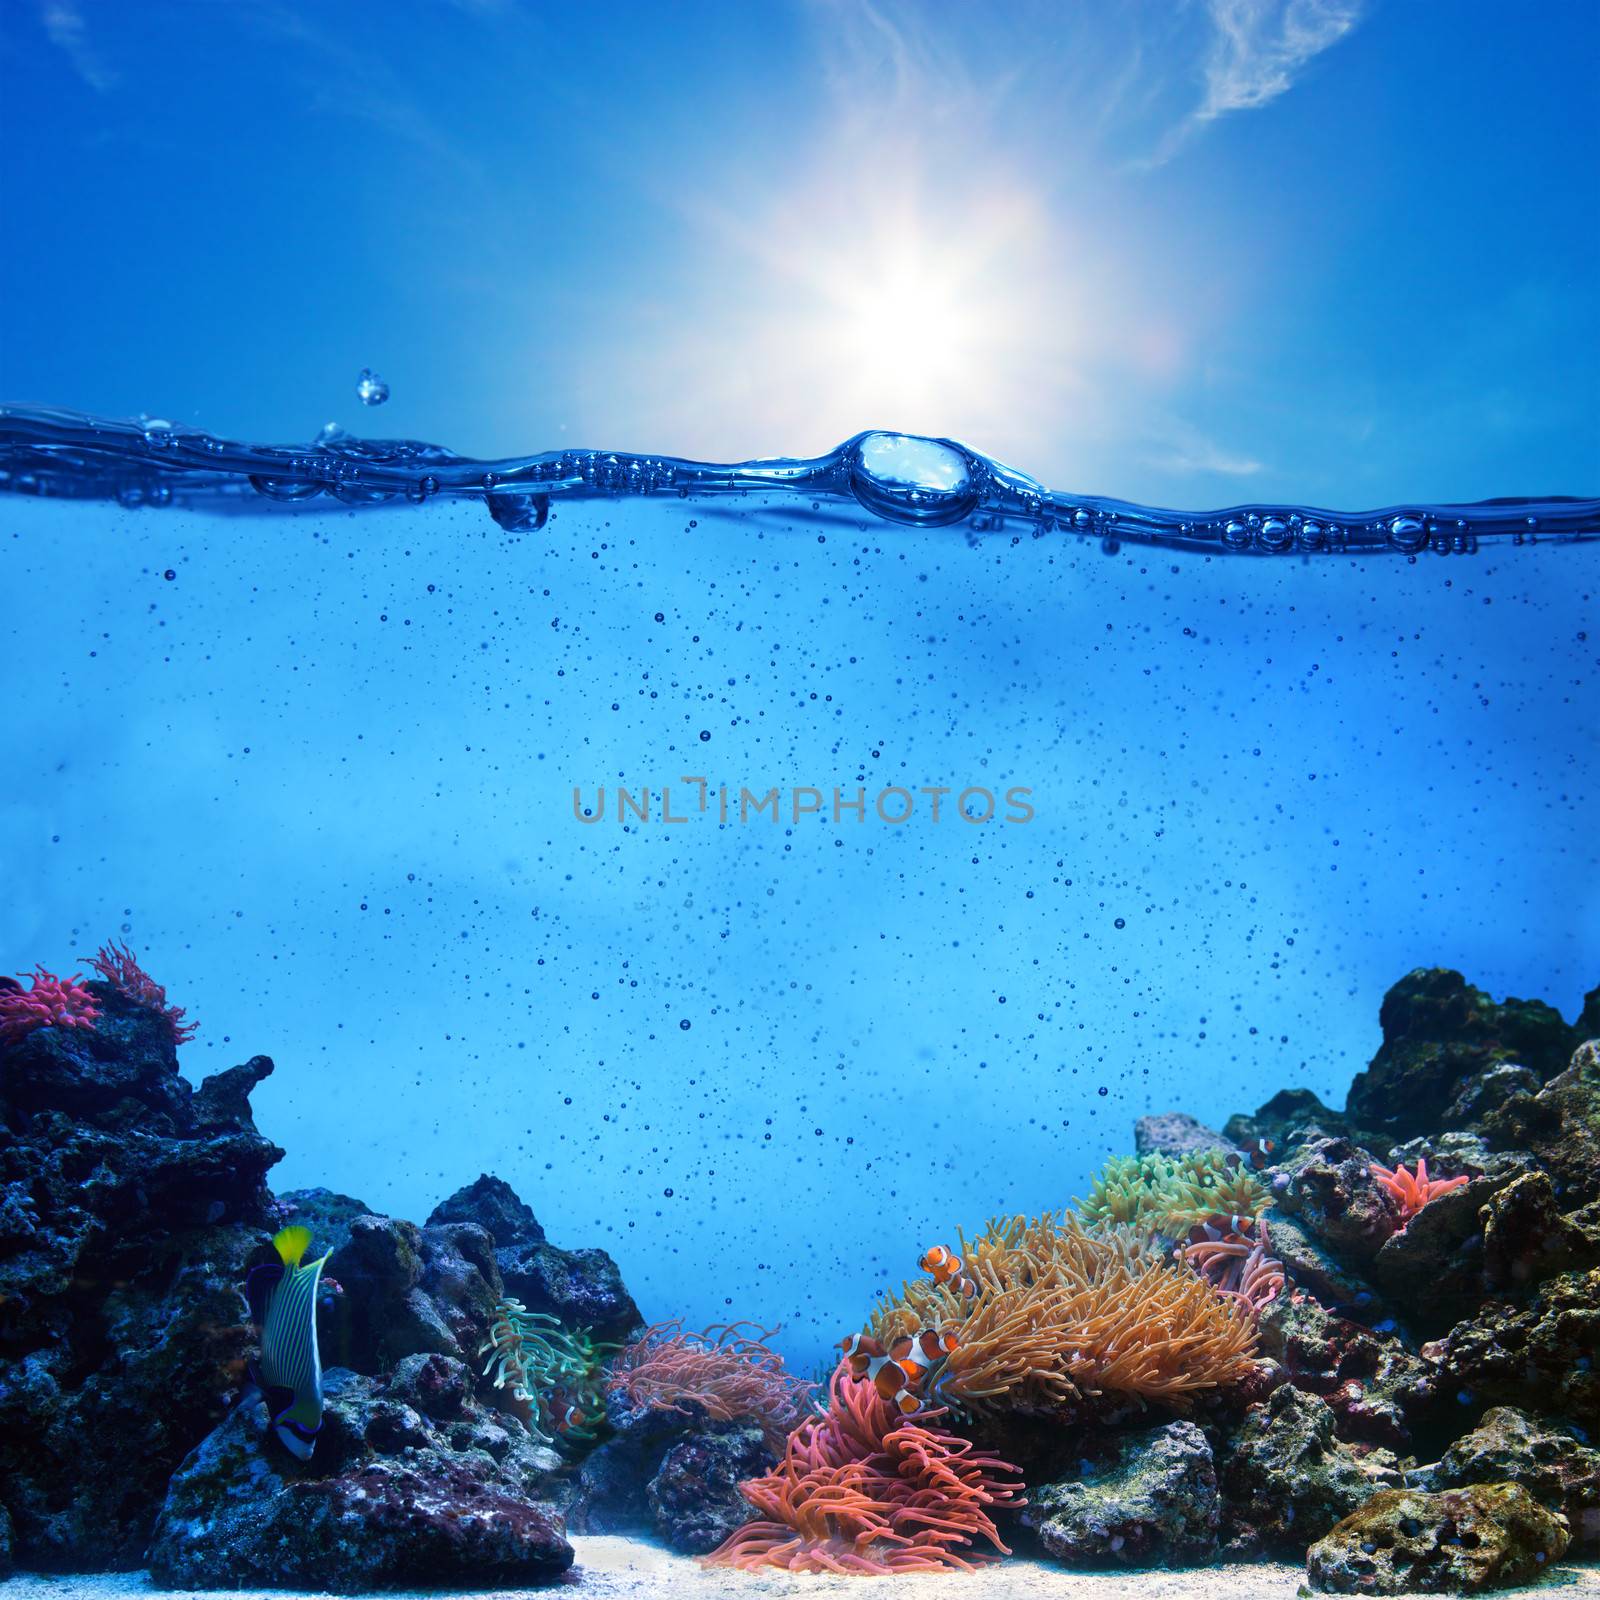 Underwater scene. Coral reef, blue sunny sky shining through clean water. Space underwater for you to fill or just use standalone. High res 